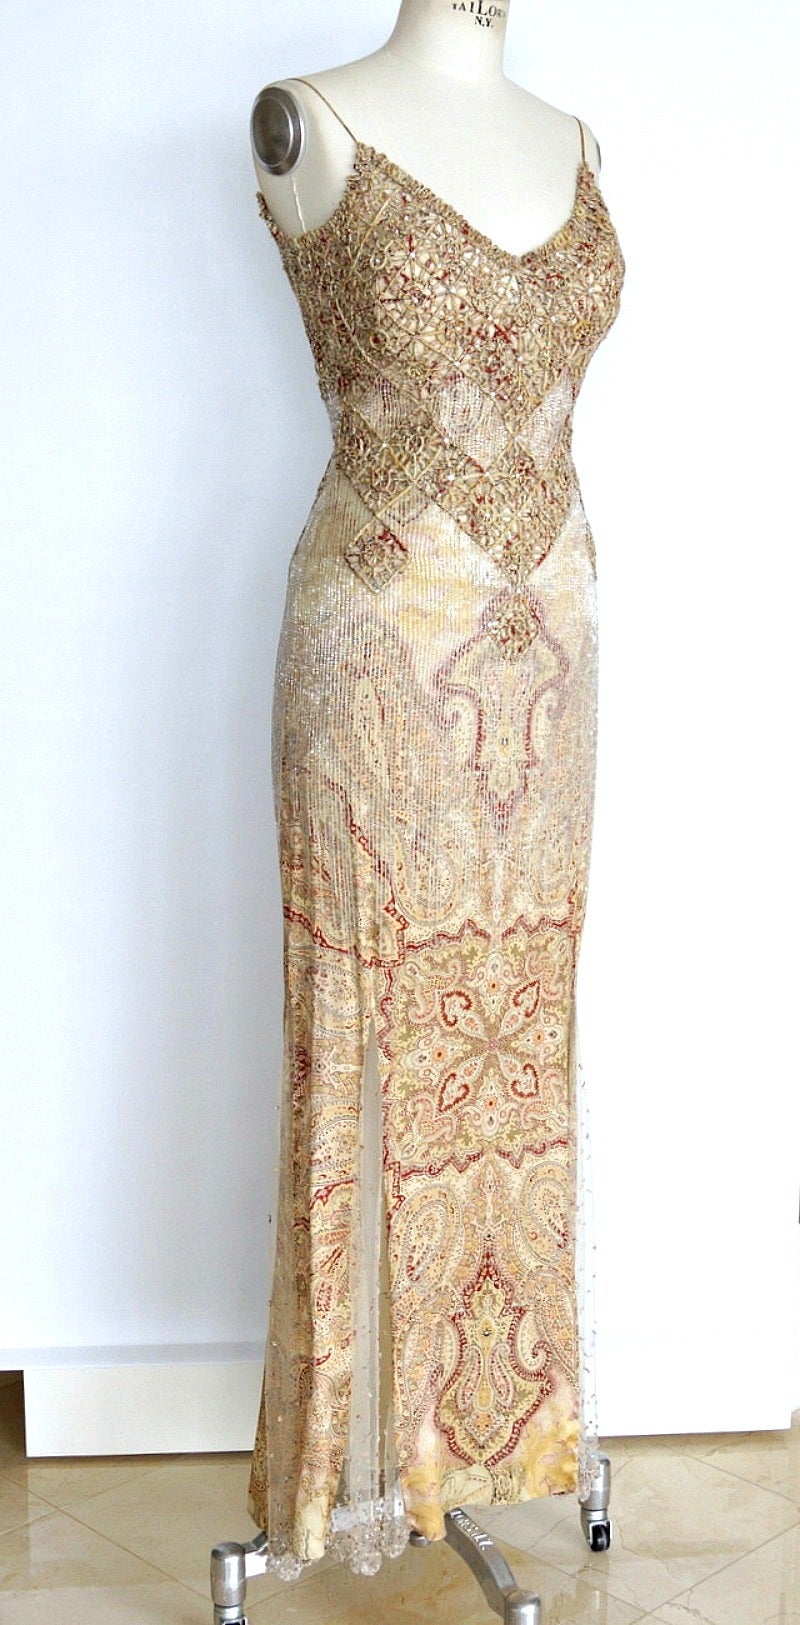 Stunning spaghetti strap extremely embellished gown.
Subtle paisley print in creams, soft gold, burgundy and black.
The top and waist area is created by rolled silk fabric with intricate lattice like effect.
Small diamantes accentuate the cut out